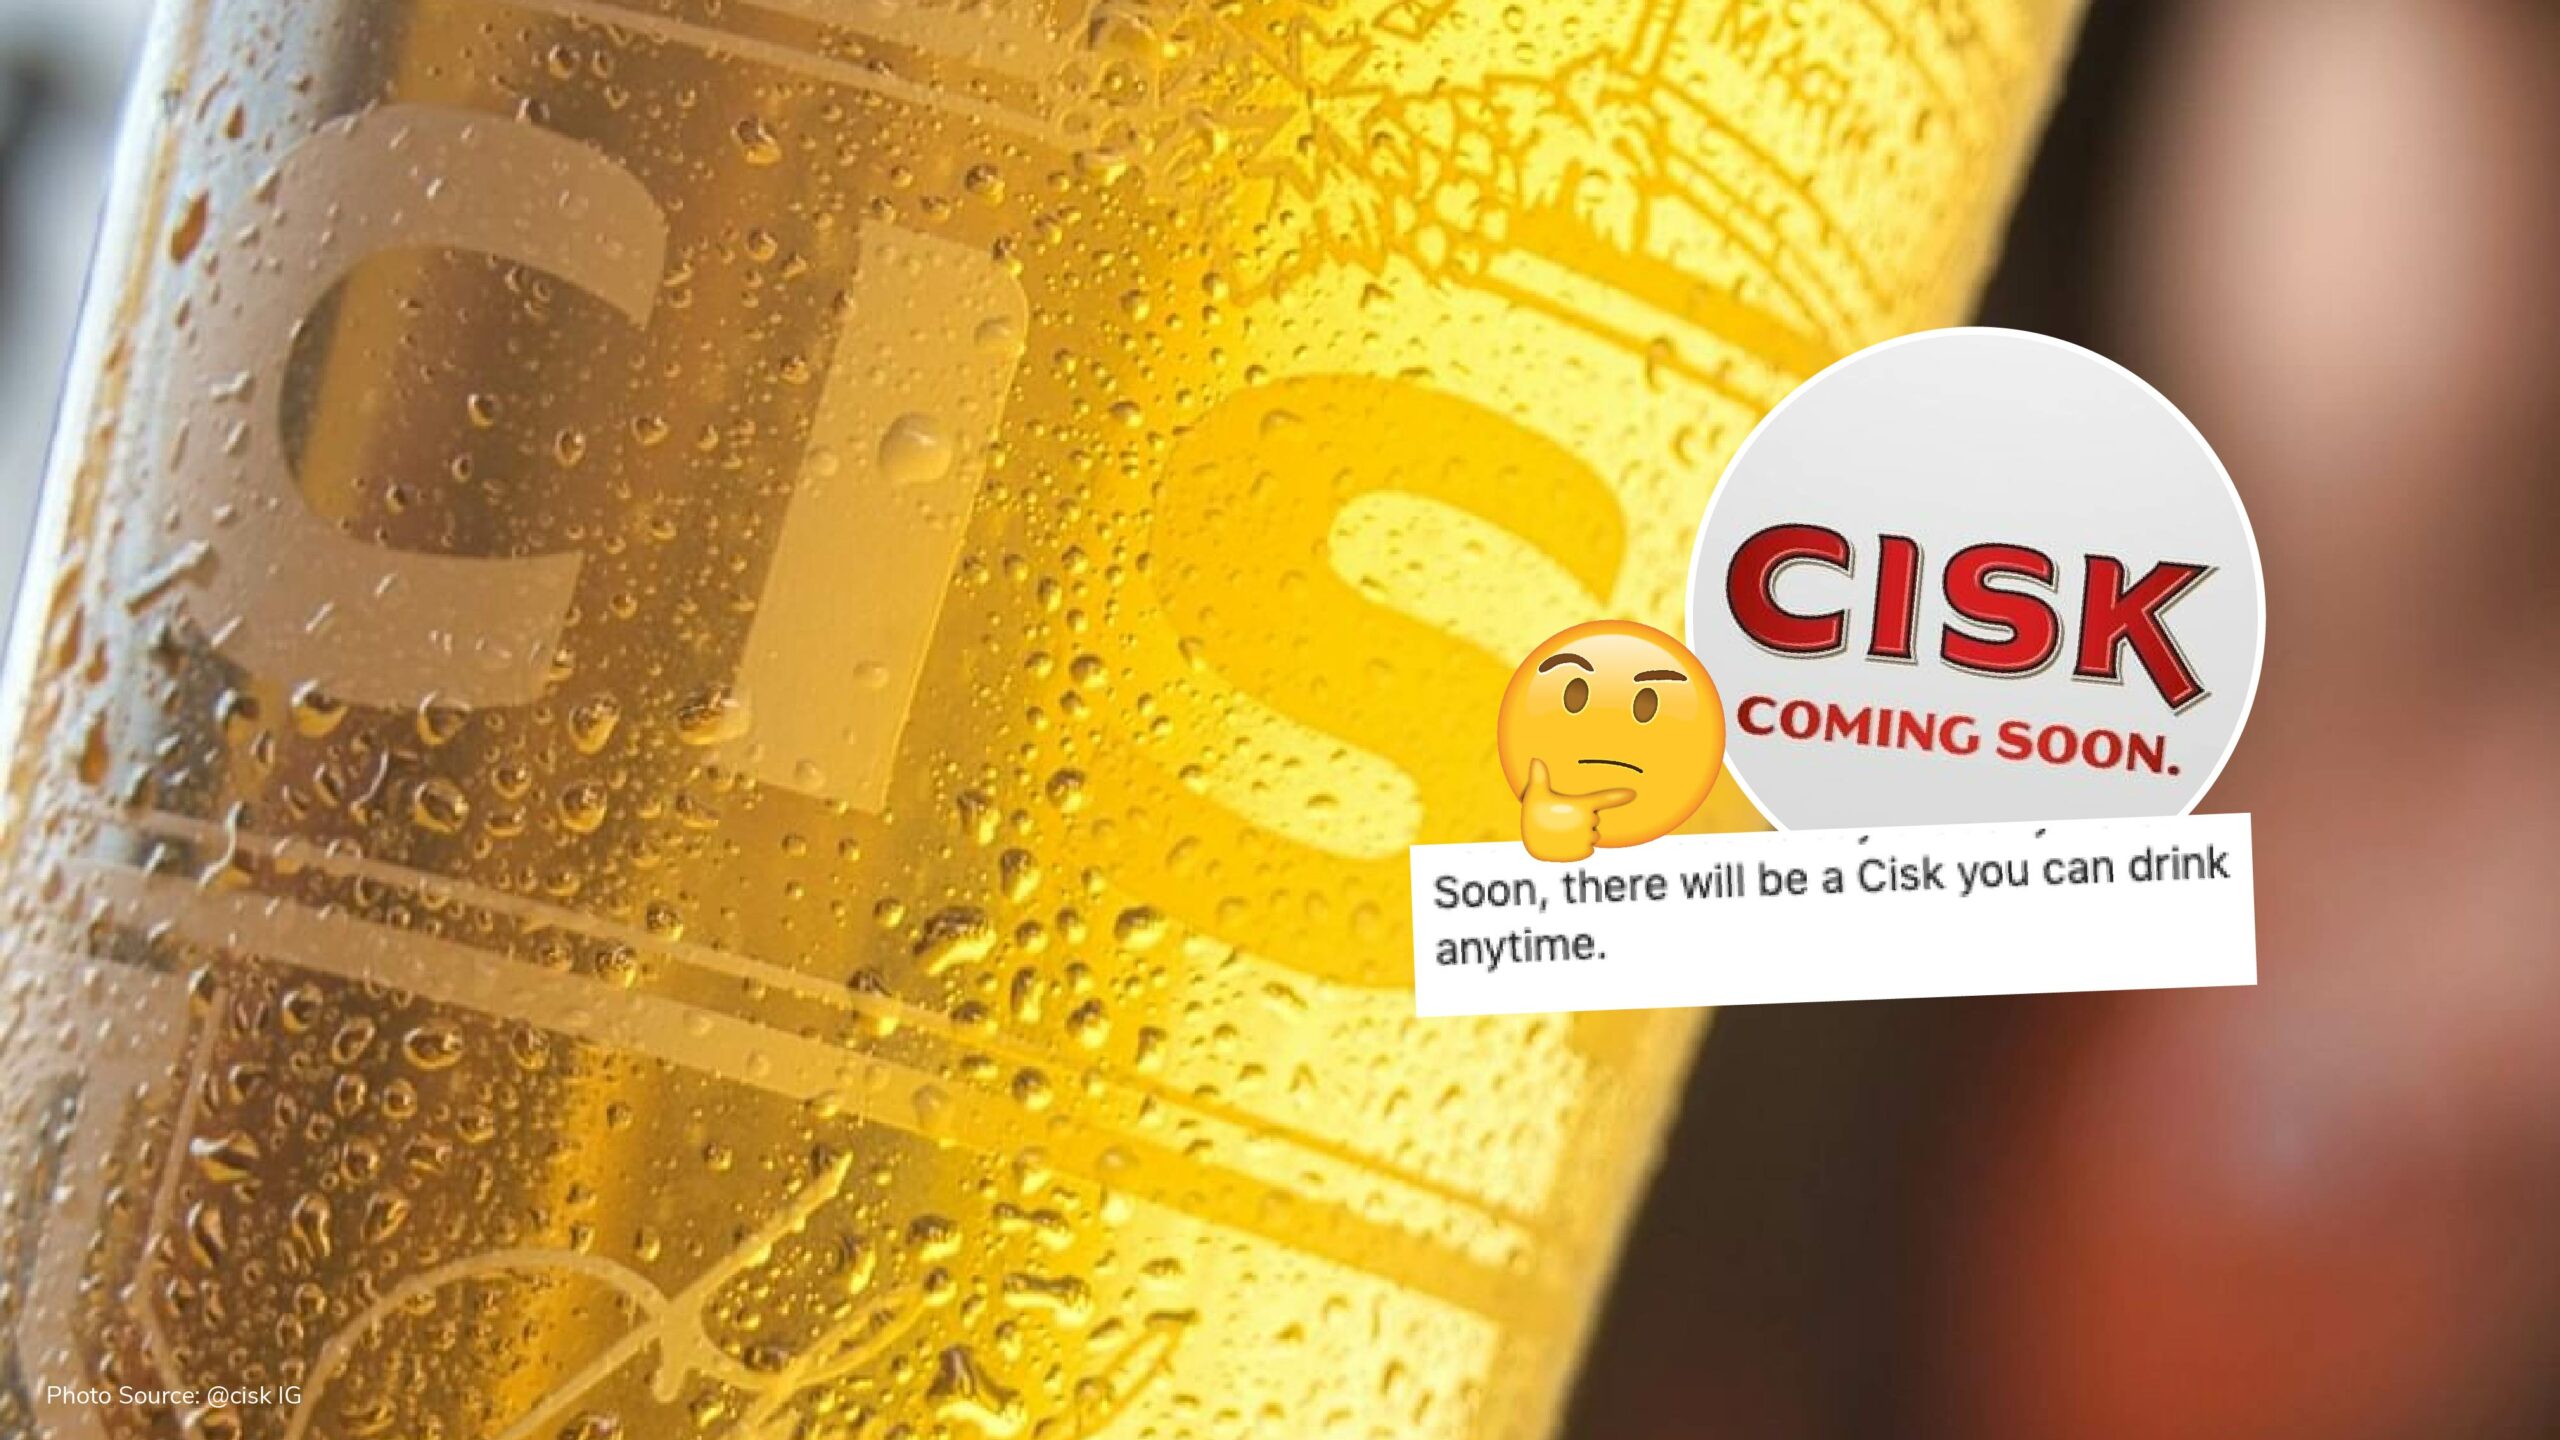 Cisk hint at launch of new non-alcoholic beer